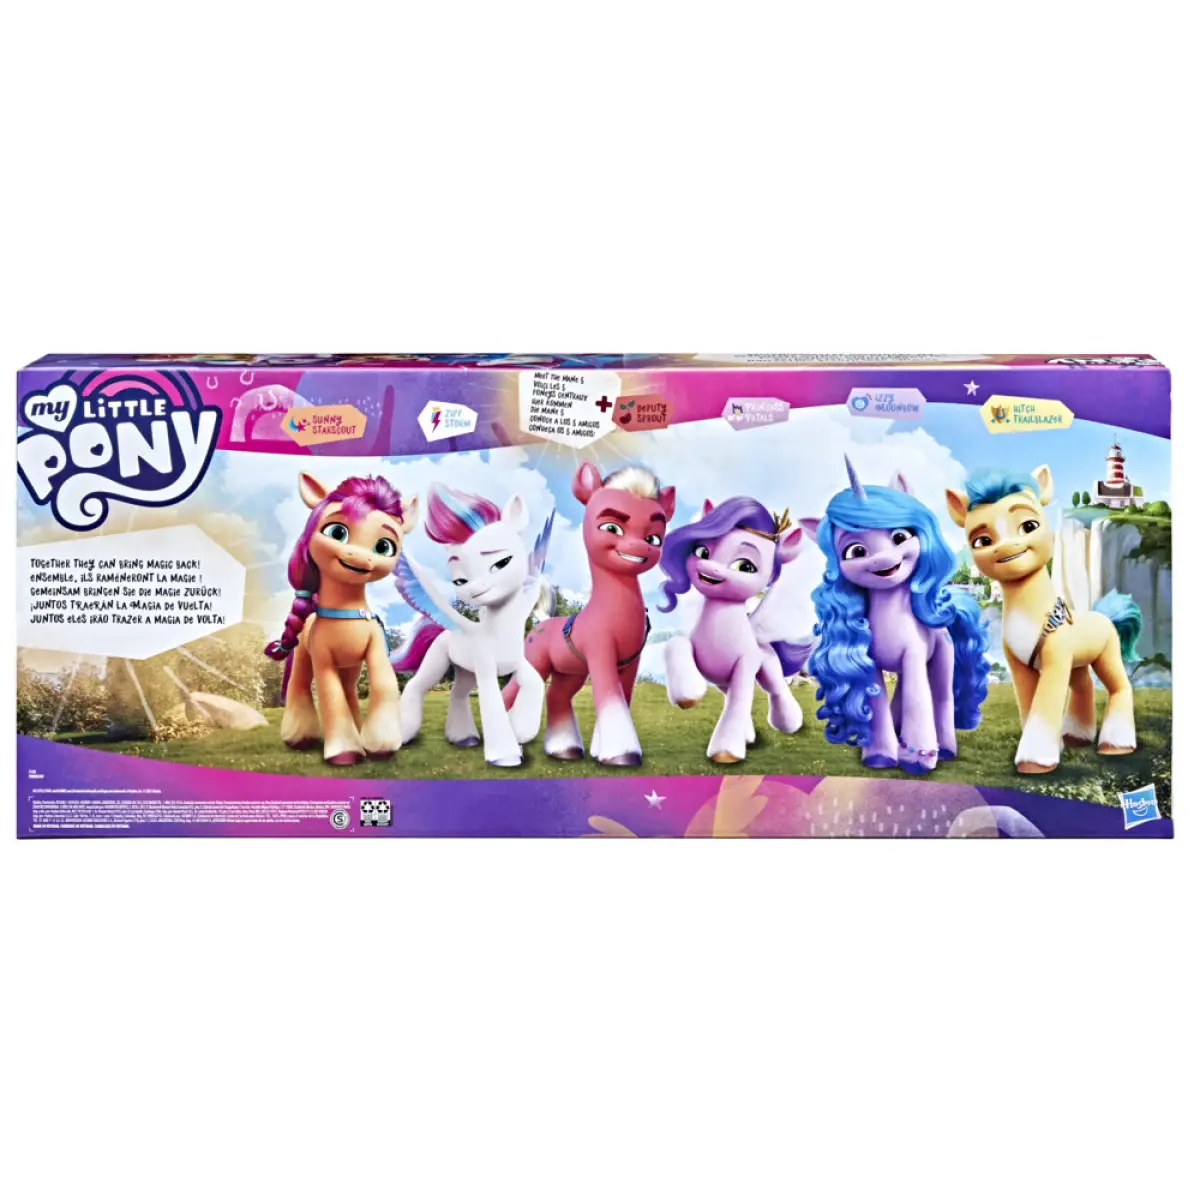 My Little Pony: A New Generation Movie Shining Adventures Collection With Deputy Sprout Toy - 6 Pony Figures With Comb, 3Yrs+